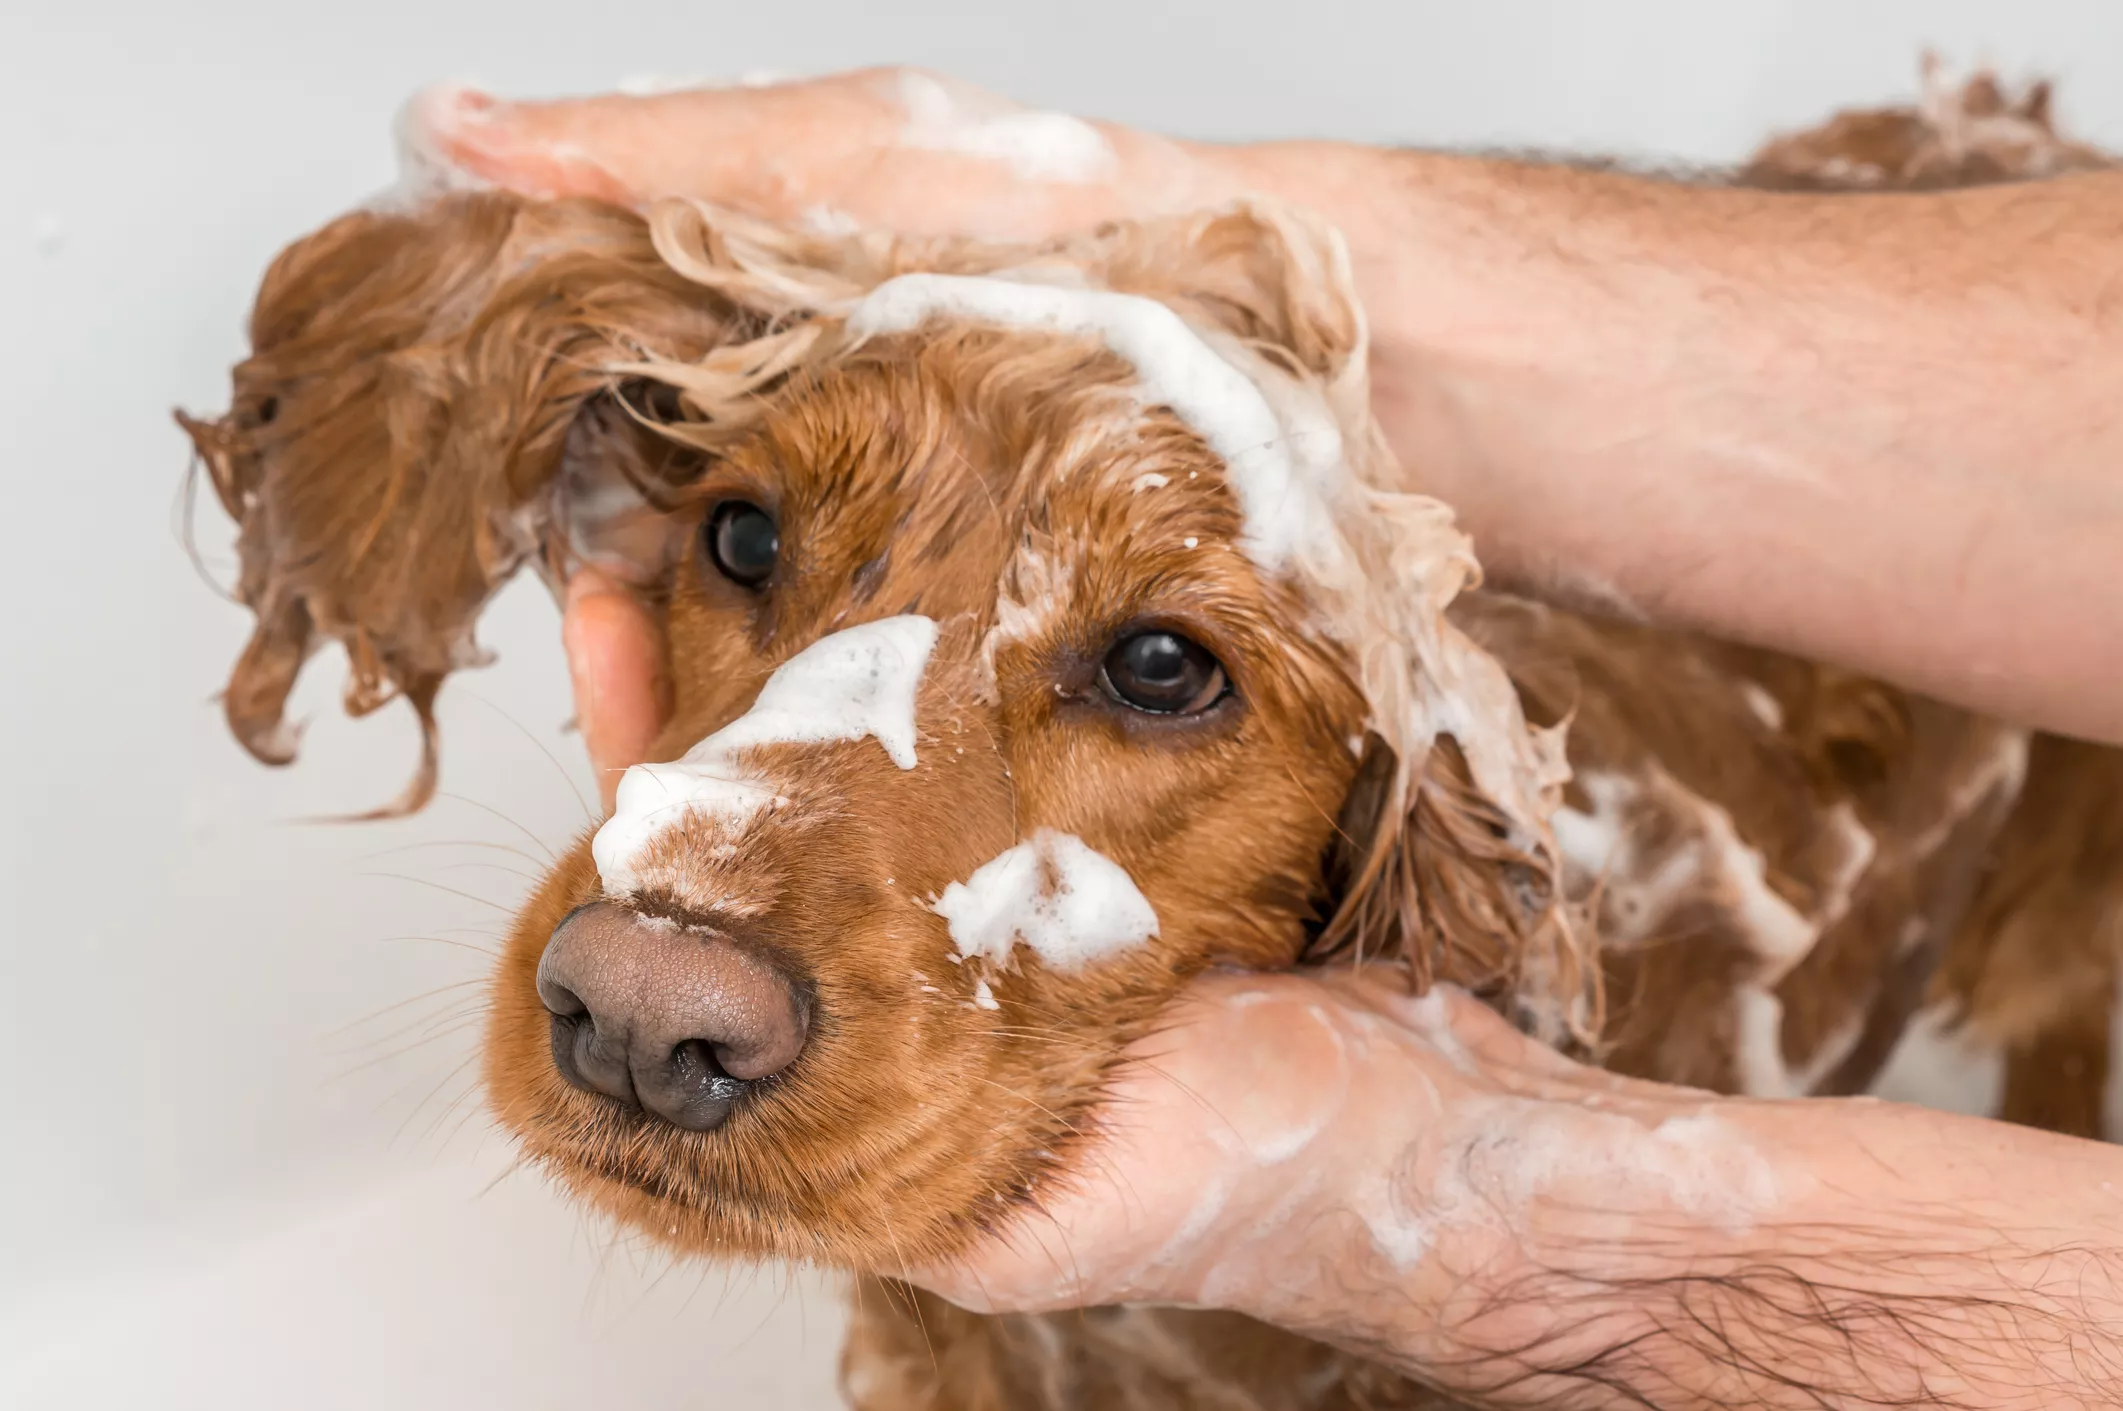 How Often Should You Wash Your Dog?